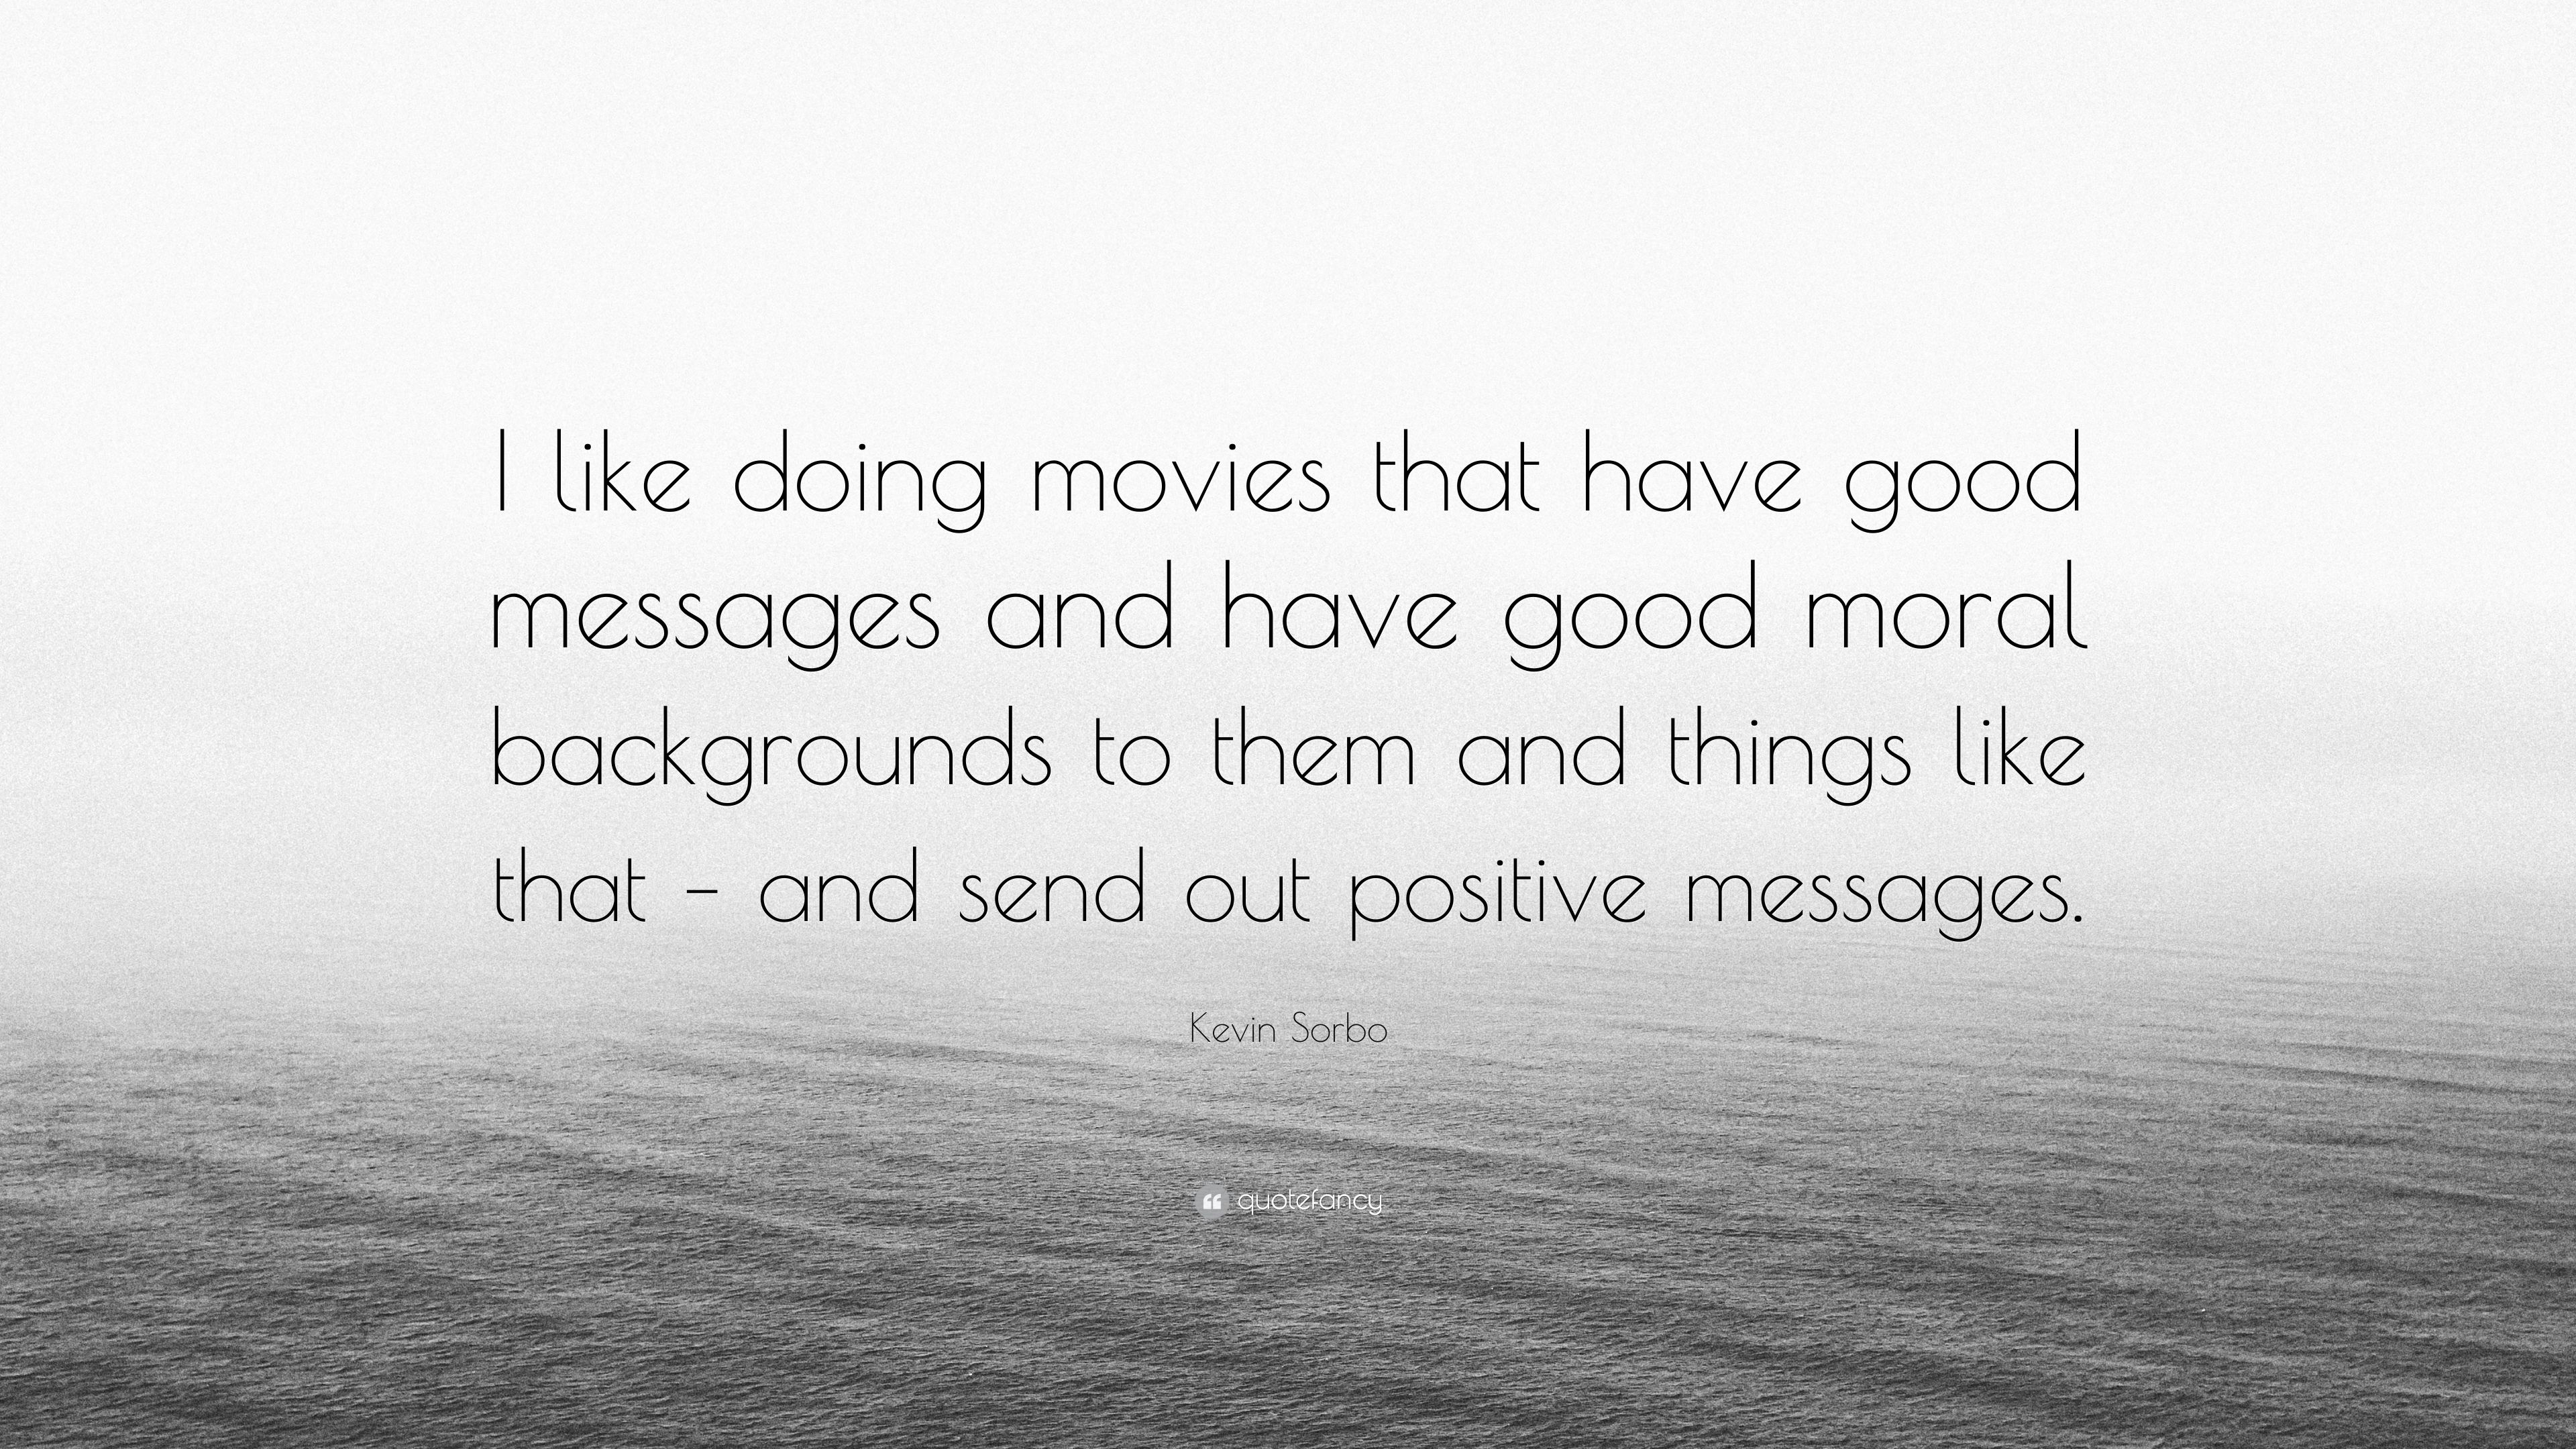 Kevin Sorbo Quote: “I like doing movies that have good messages